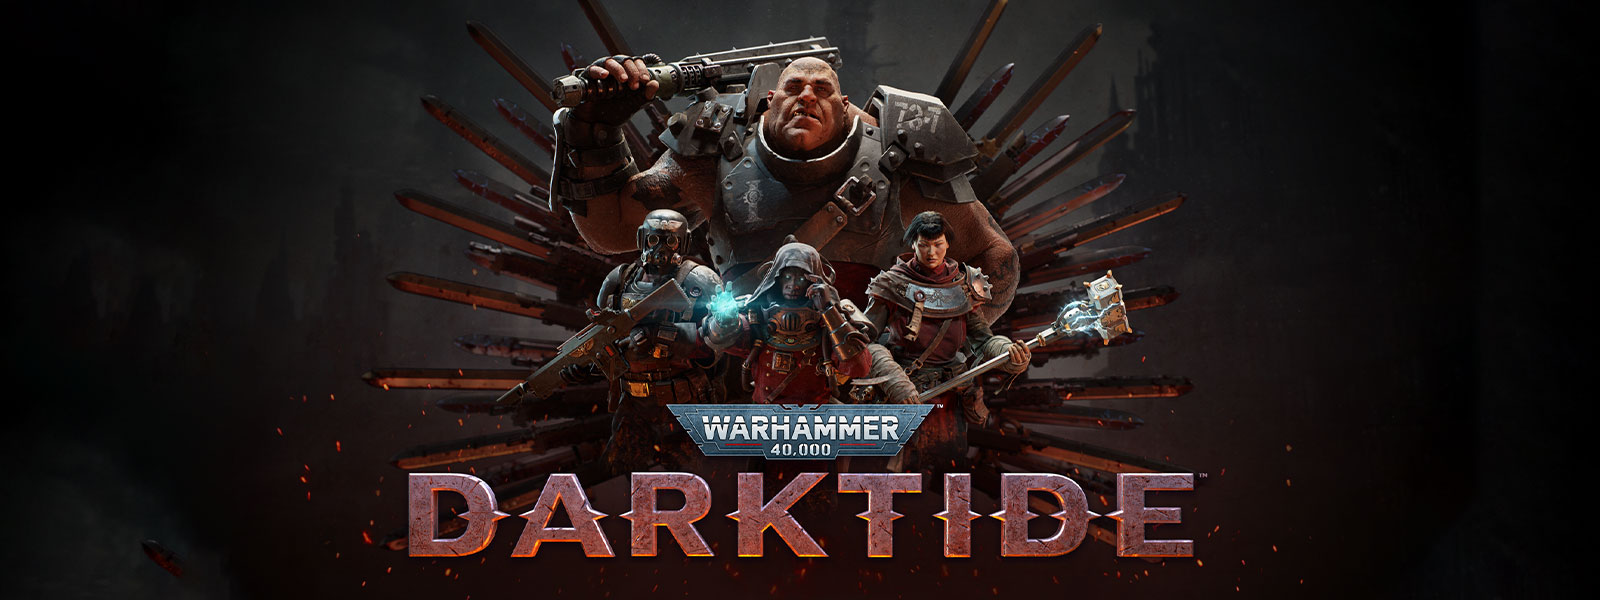 Warhammer 40,000: Darktide, A squad of armoured characters pose in front of a blade motif.